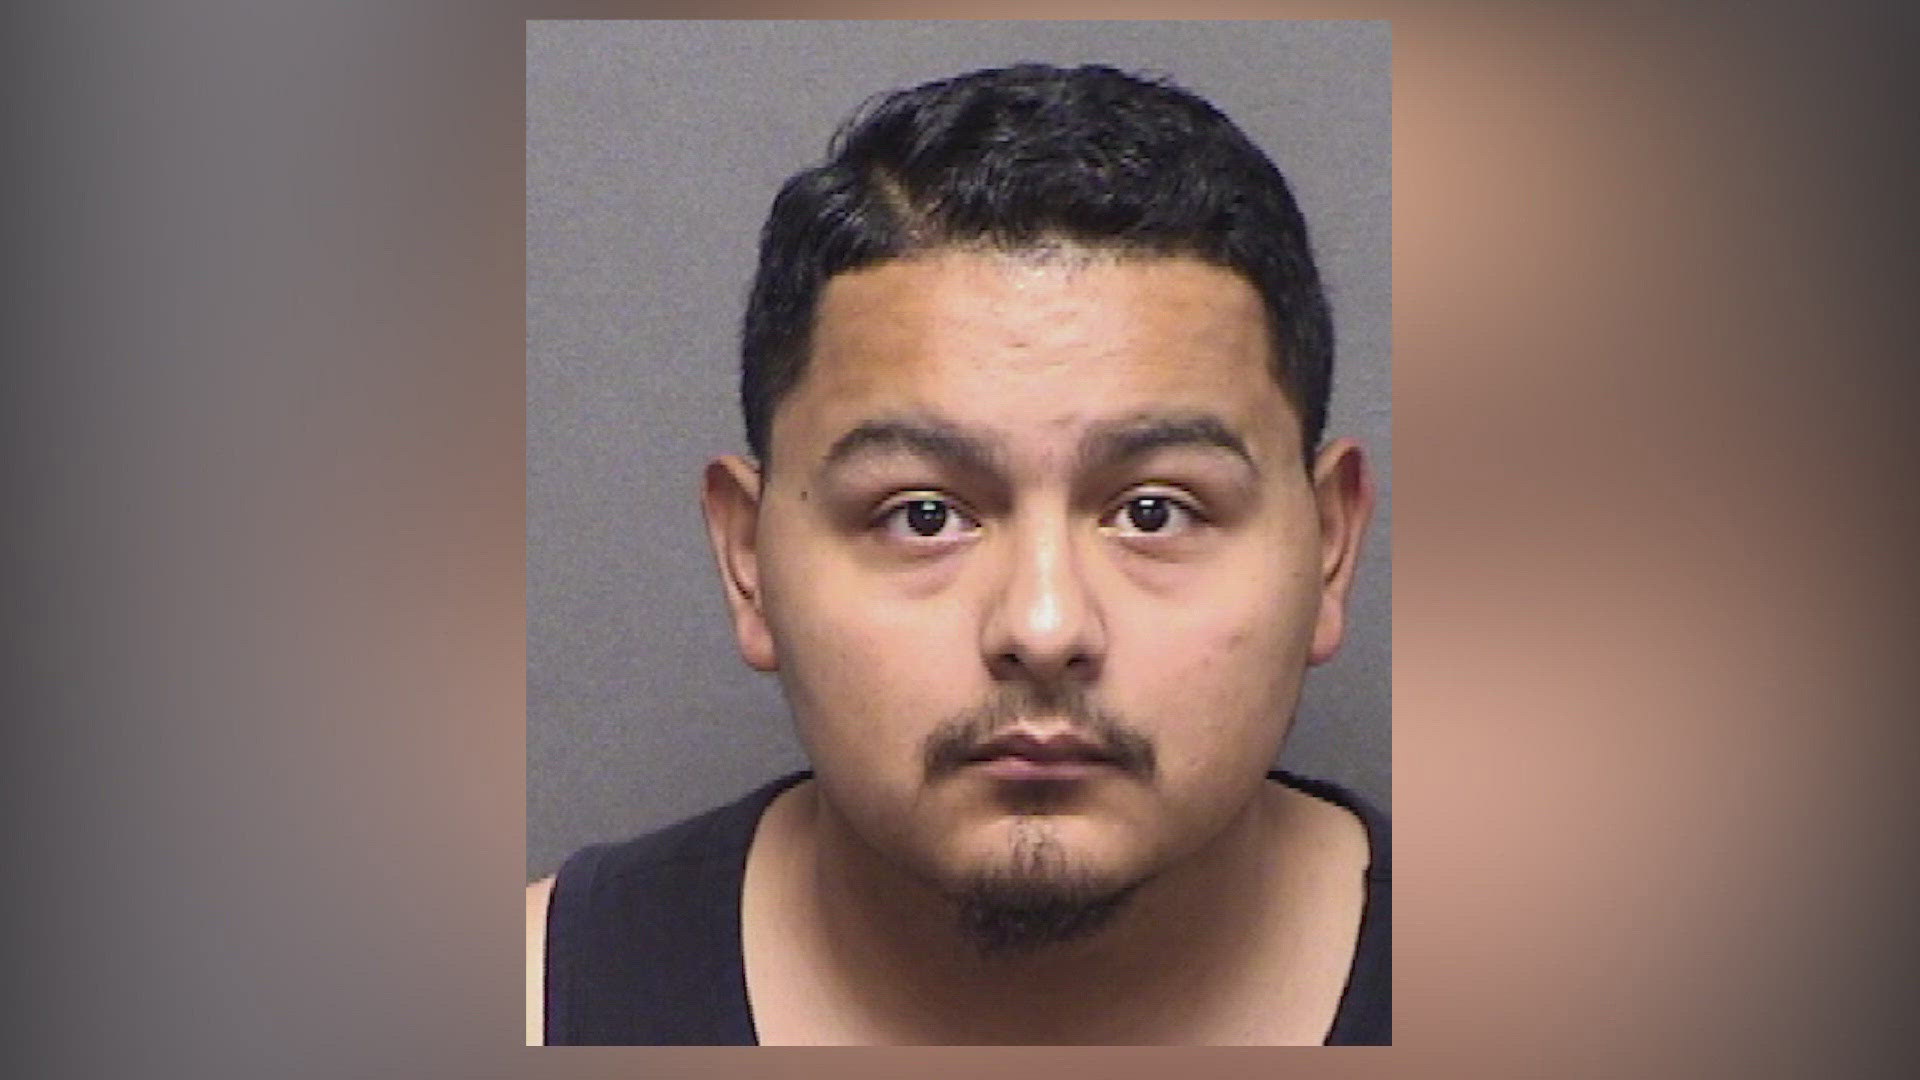 The man is reportedly out on bond. He was arrested after claims that he used his job to access and share intimate videos from an applicant's phone.